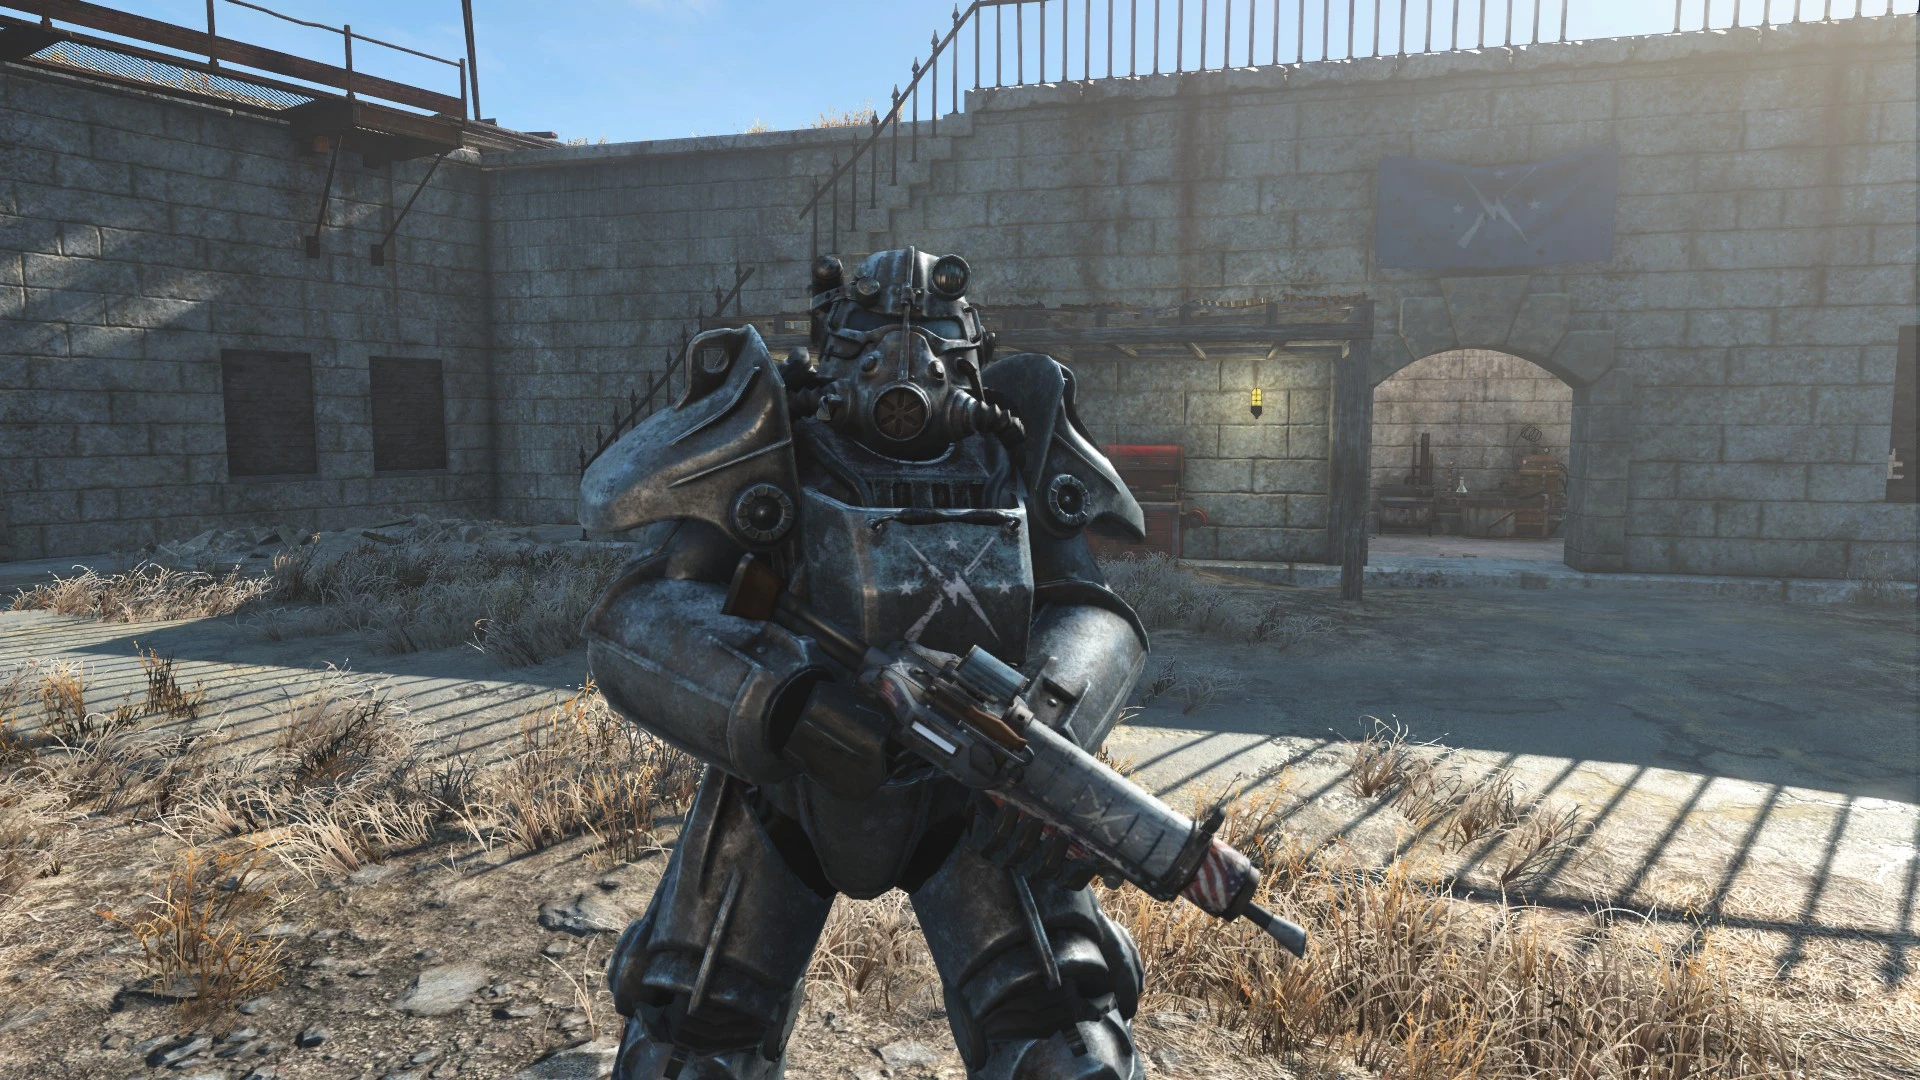 mod manager fallout 4